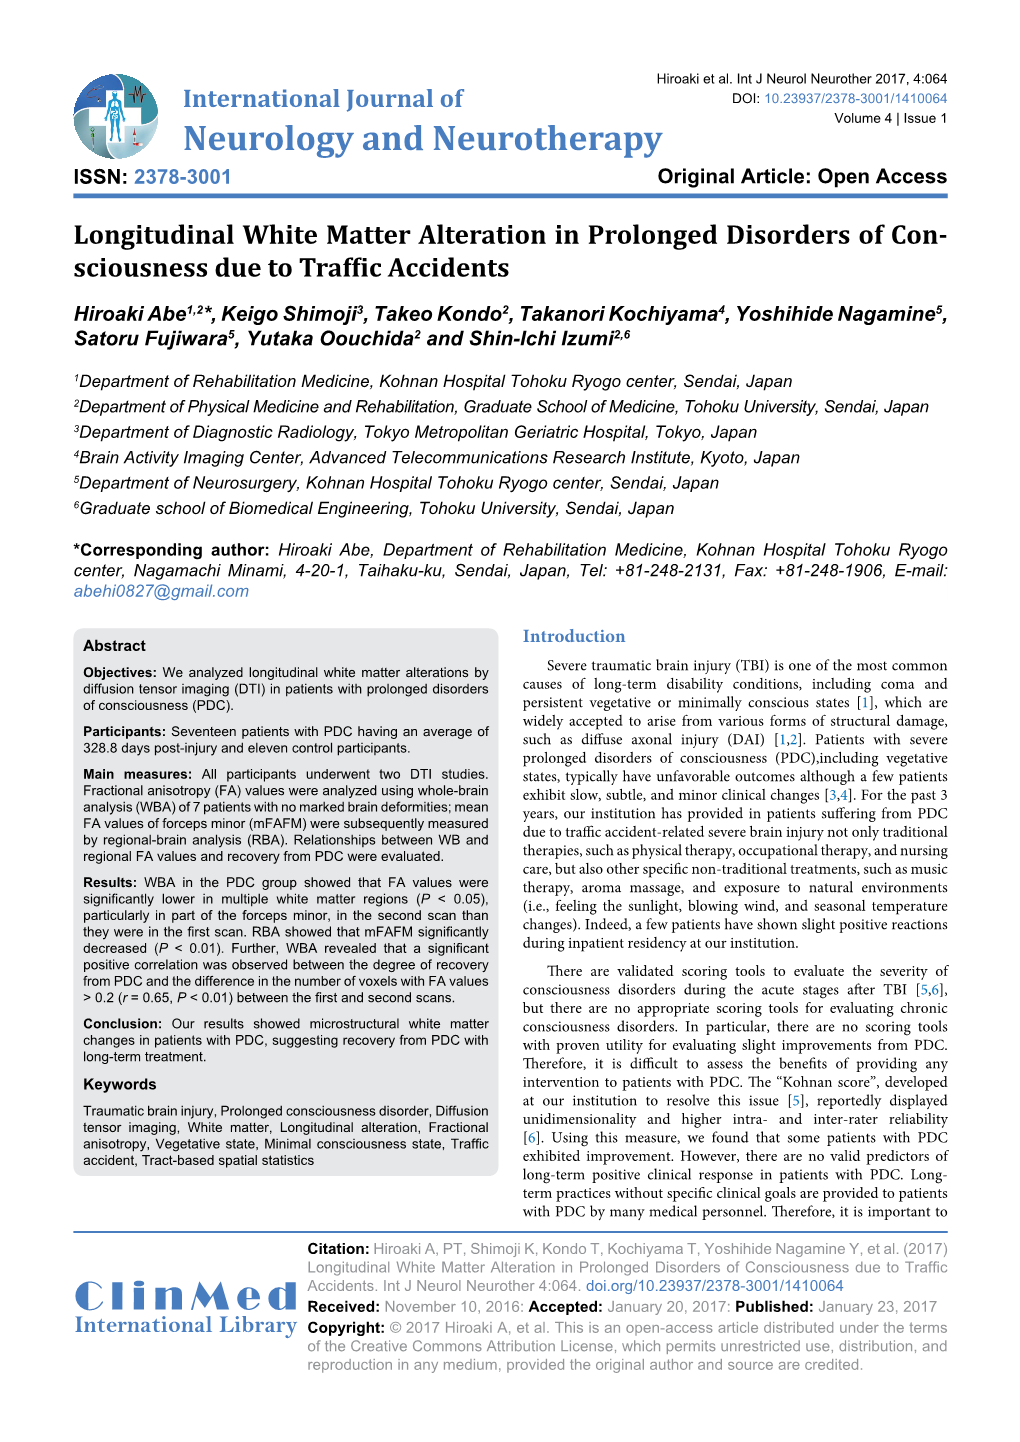 Longitudinal White Matter Alteration in Prolonged Disorders of Con- Sciousness Due to Traffic Accidents